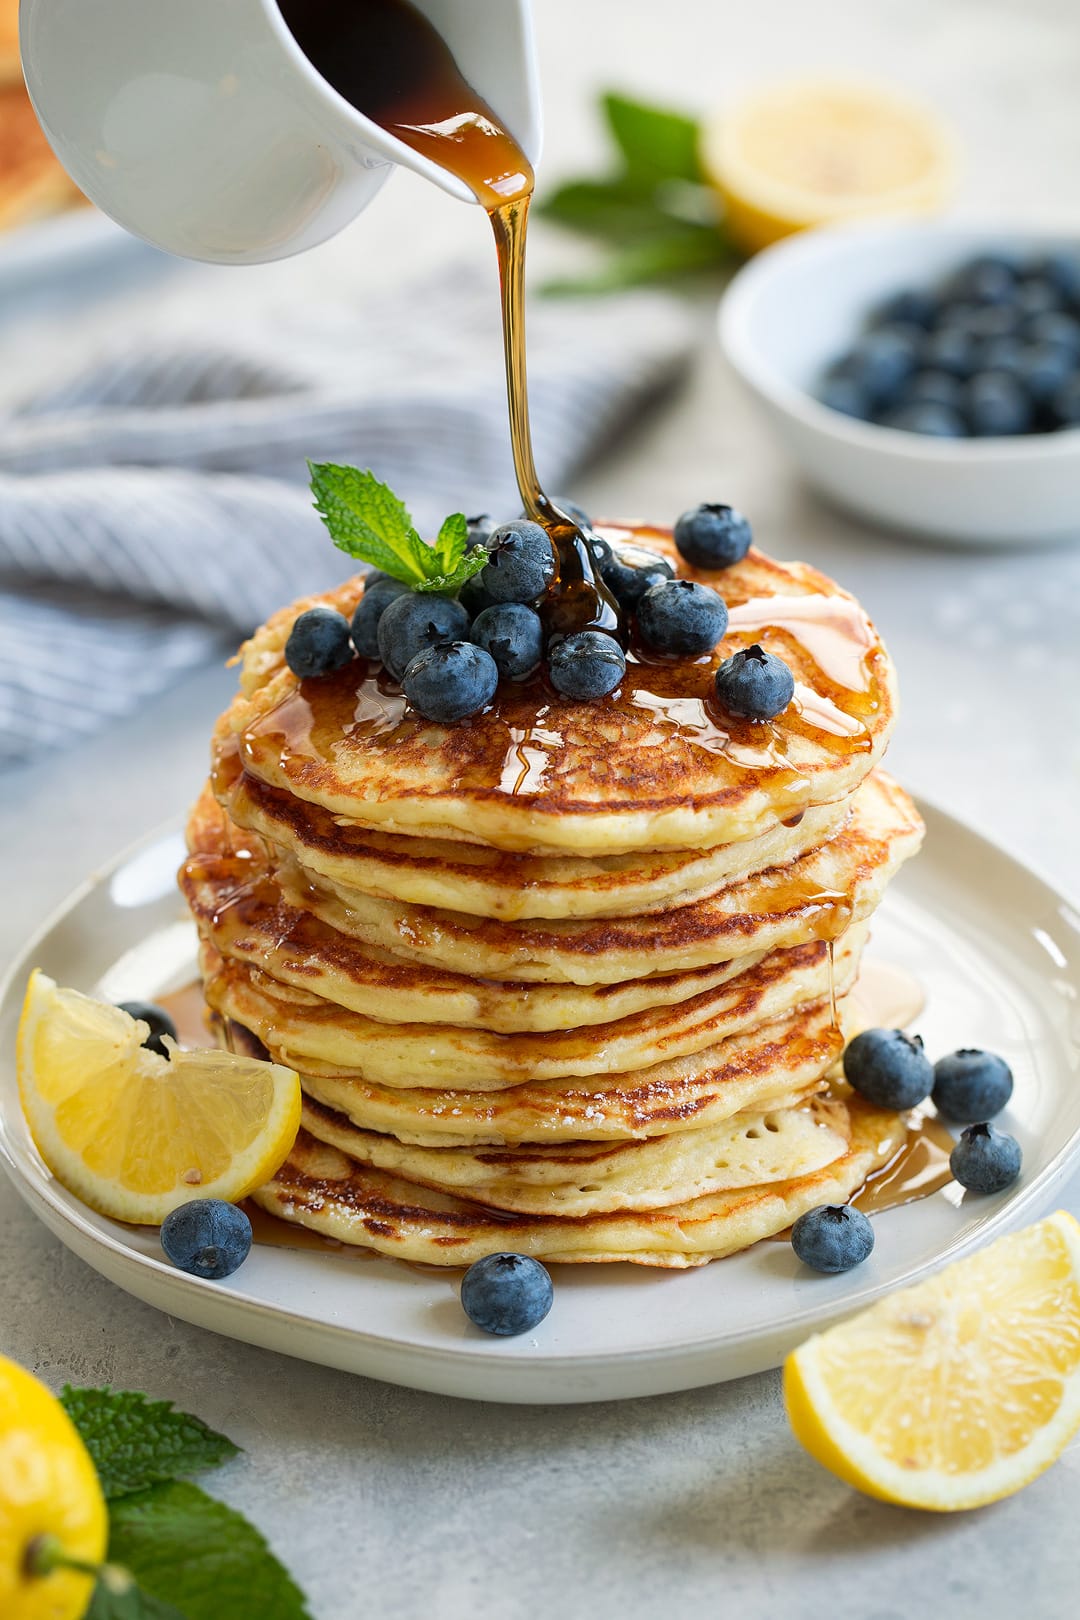 stack of eight lemon ricotta pancakes topped with fresh blueberries and mint maple syrup poured over pancakes lemon slices added on plate for garnish 